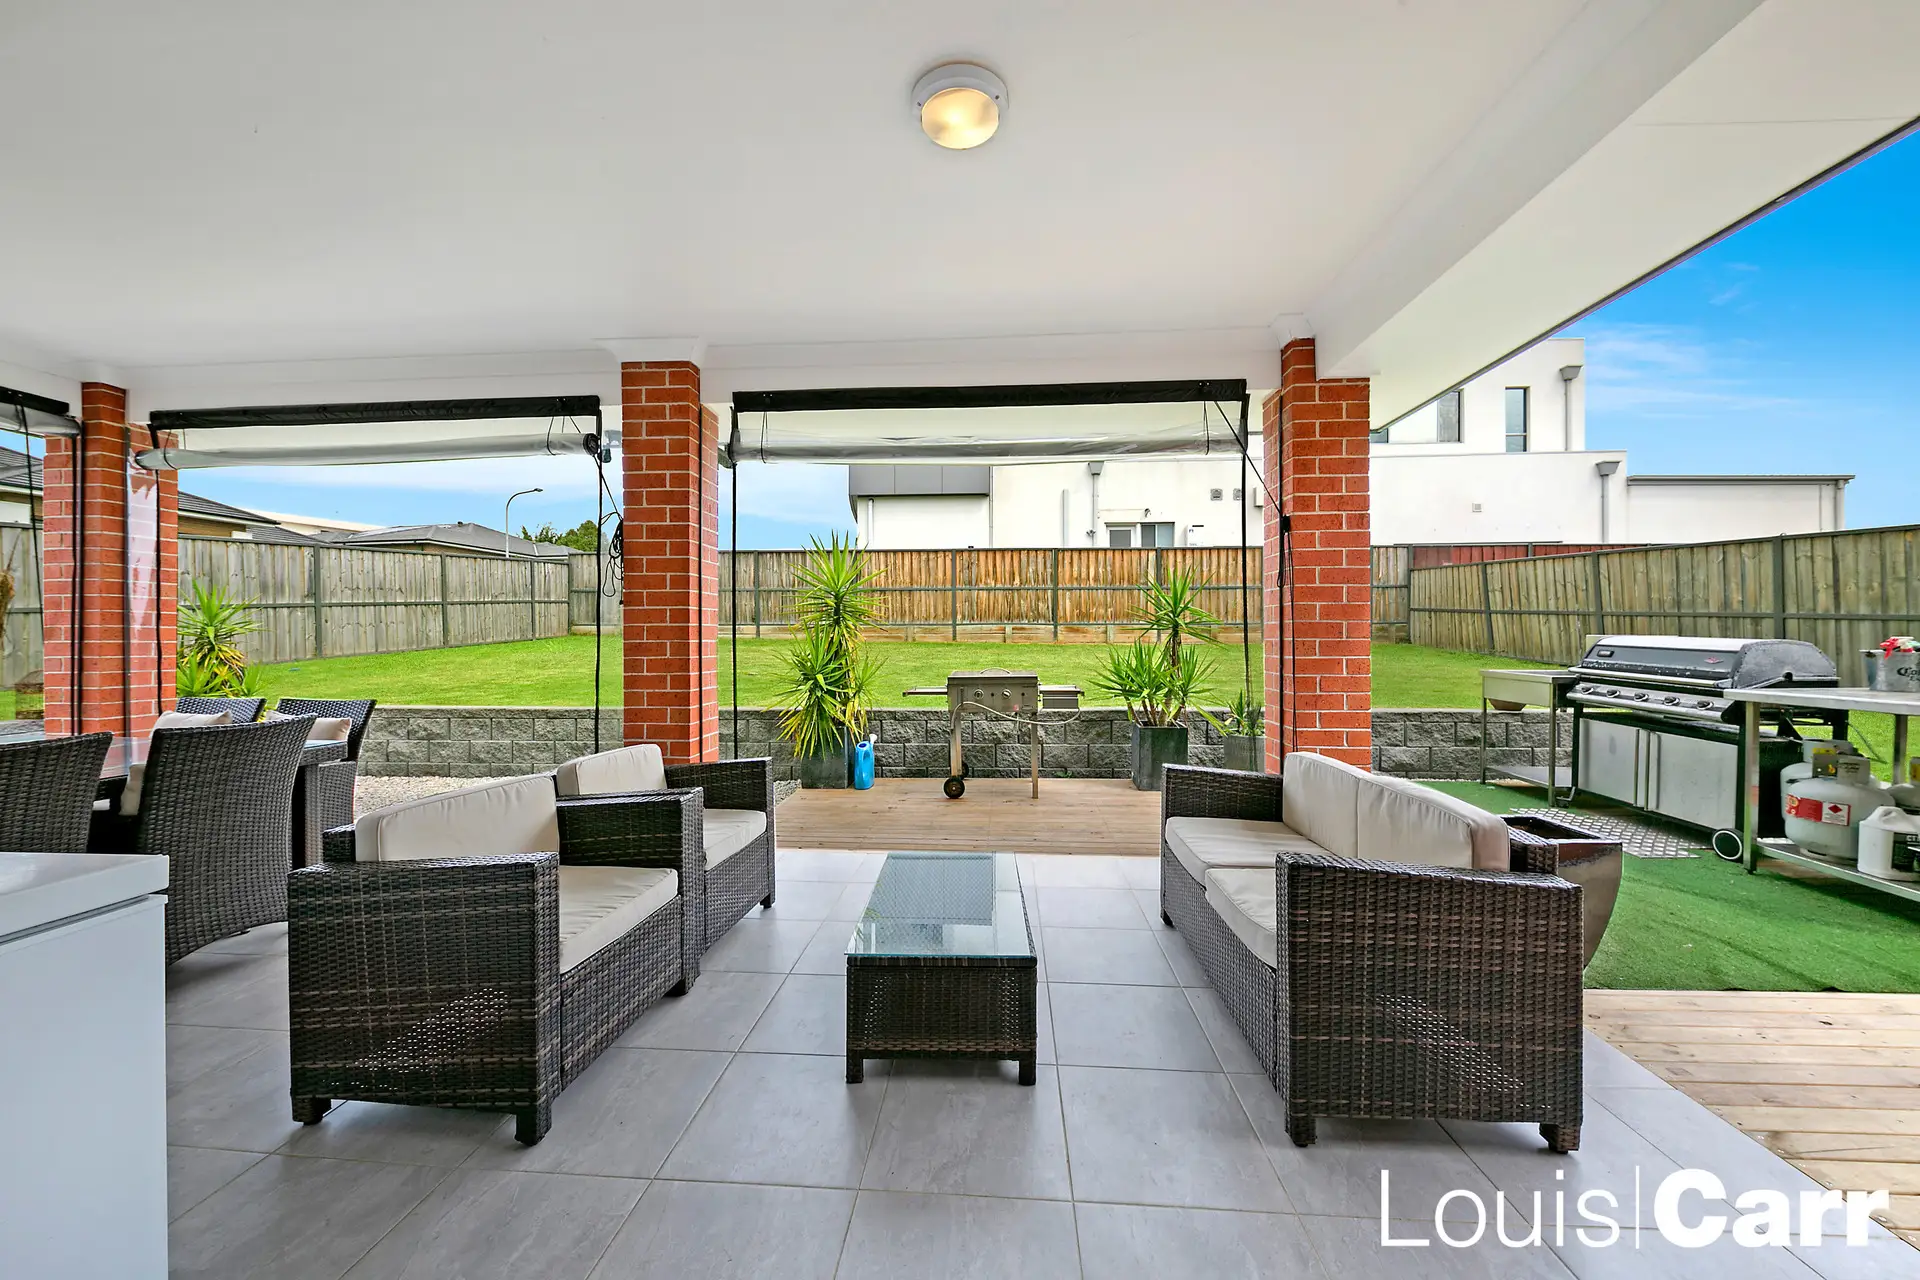 Photo #12: 17 Florence Avenue, Kellyville - Sold by Louis Carr Real Estate